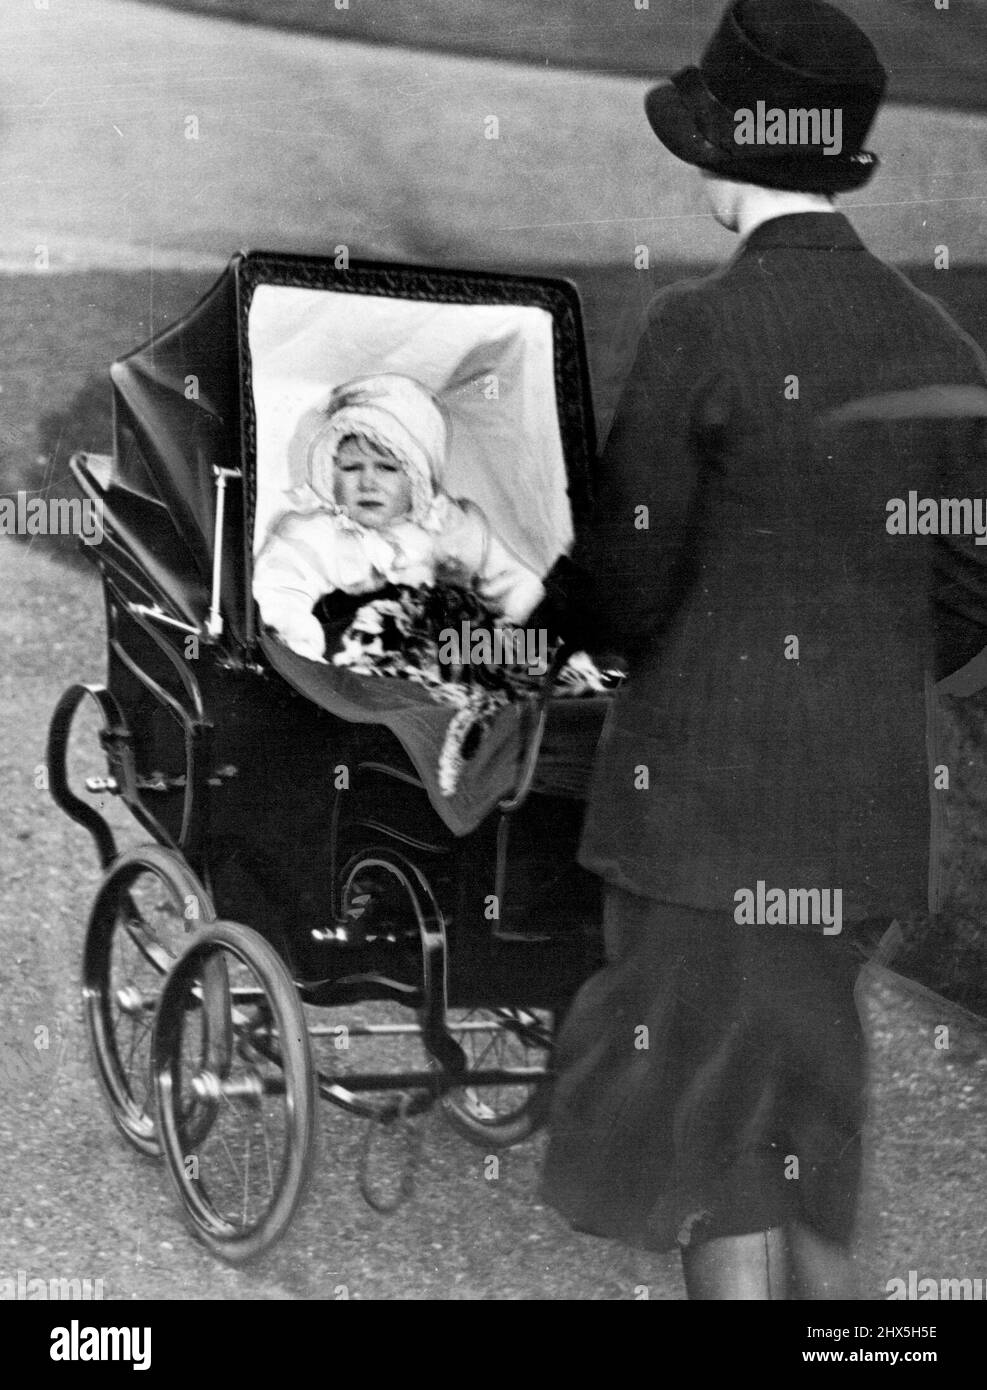 Princess Elizabeth's Pram - Princess Elizabeth as a baby riding in the perambulator which will be used by her own child. Princess Elizabeth's baby, which it is expected will be born at Buckingham Palace in the middle of this month, will have the Princess's own perambulator cots and cradle. November 05, 1948. Stock Photo